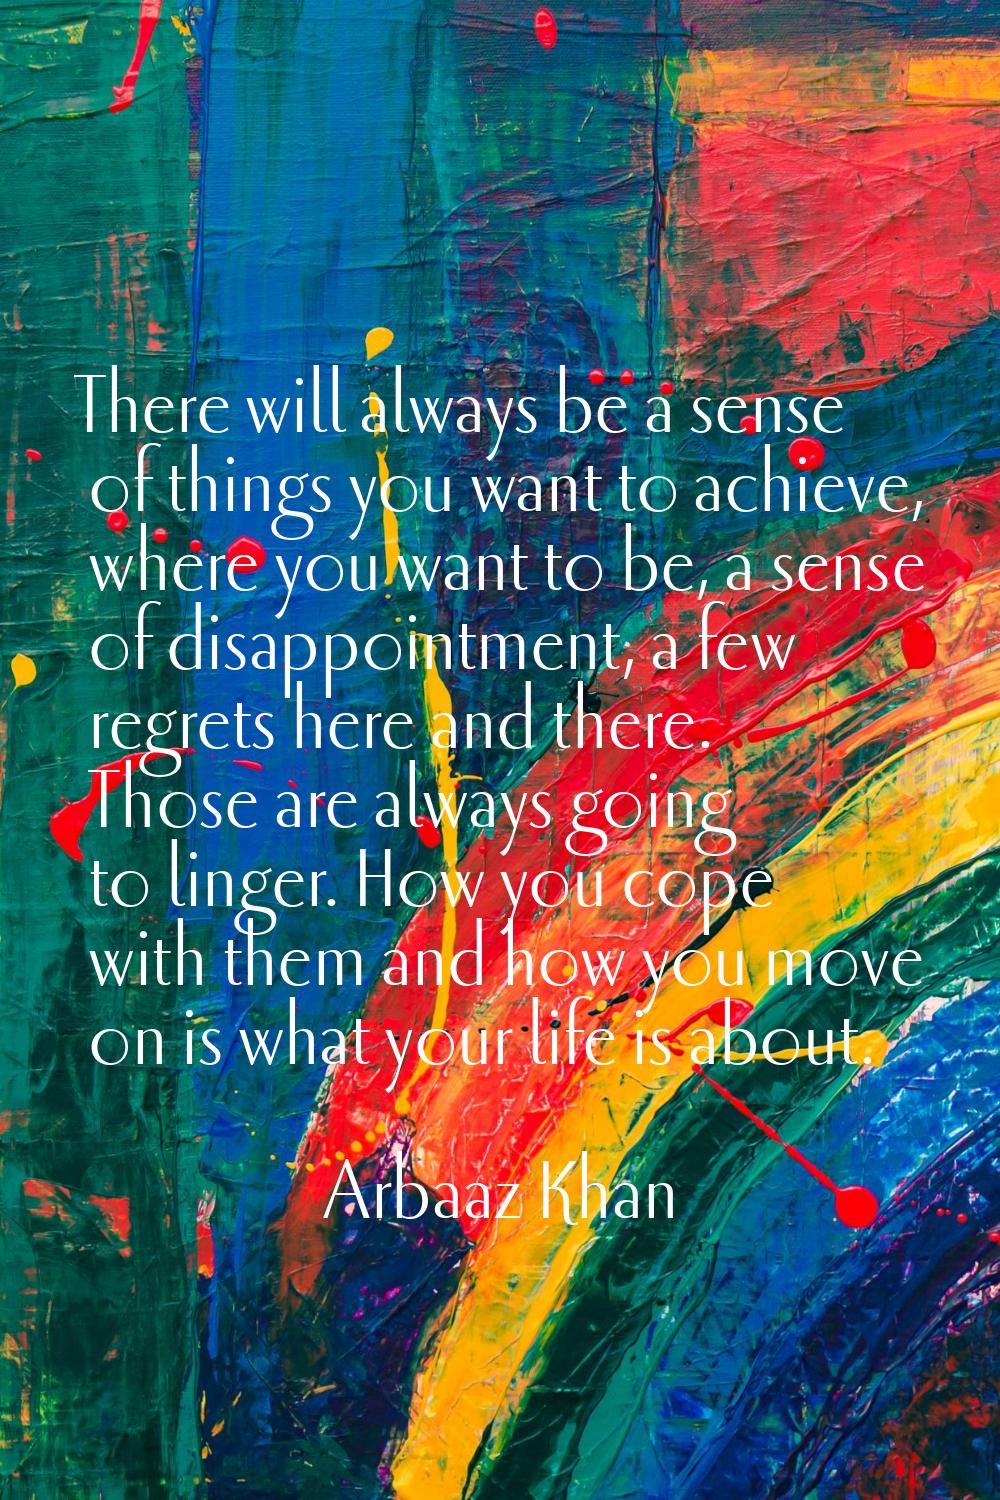 There will always be a sense of things you want to achieve, where you want to be, a sense of disapp